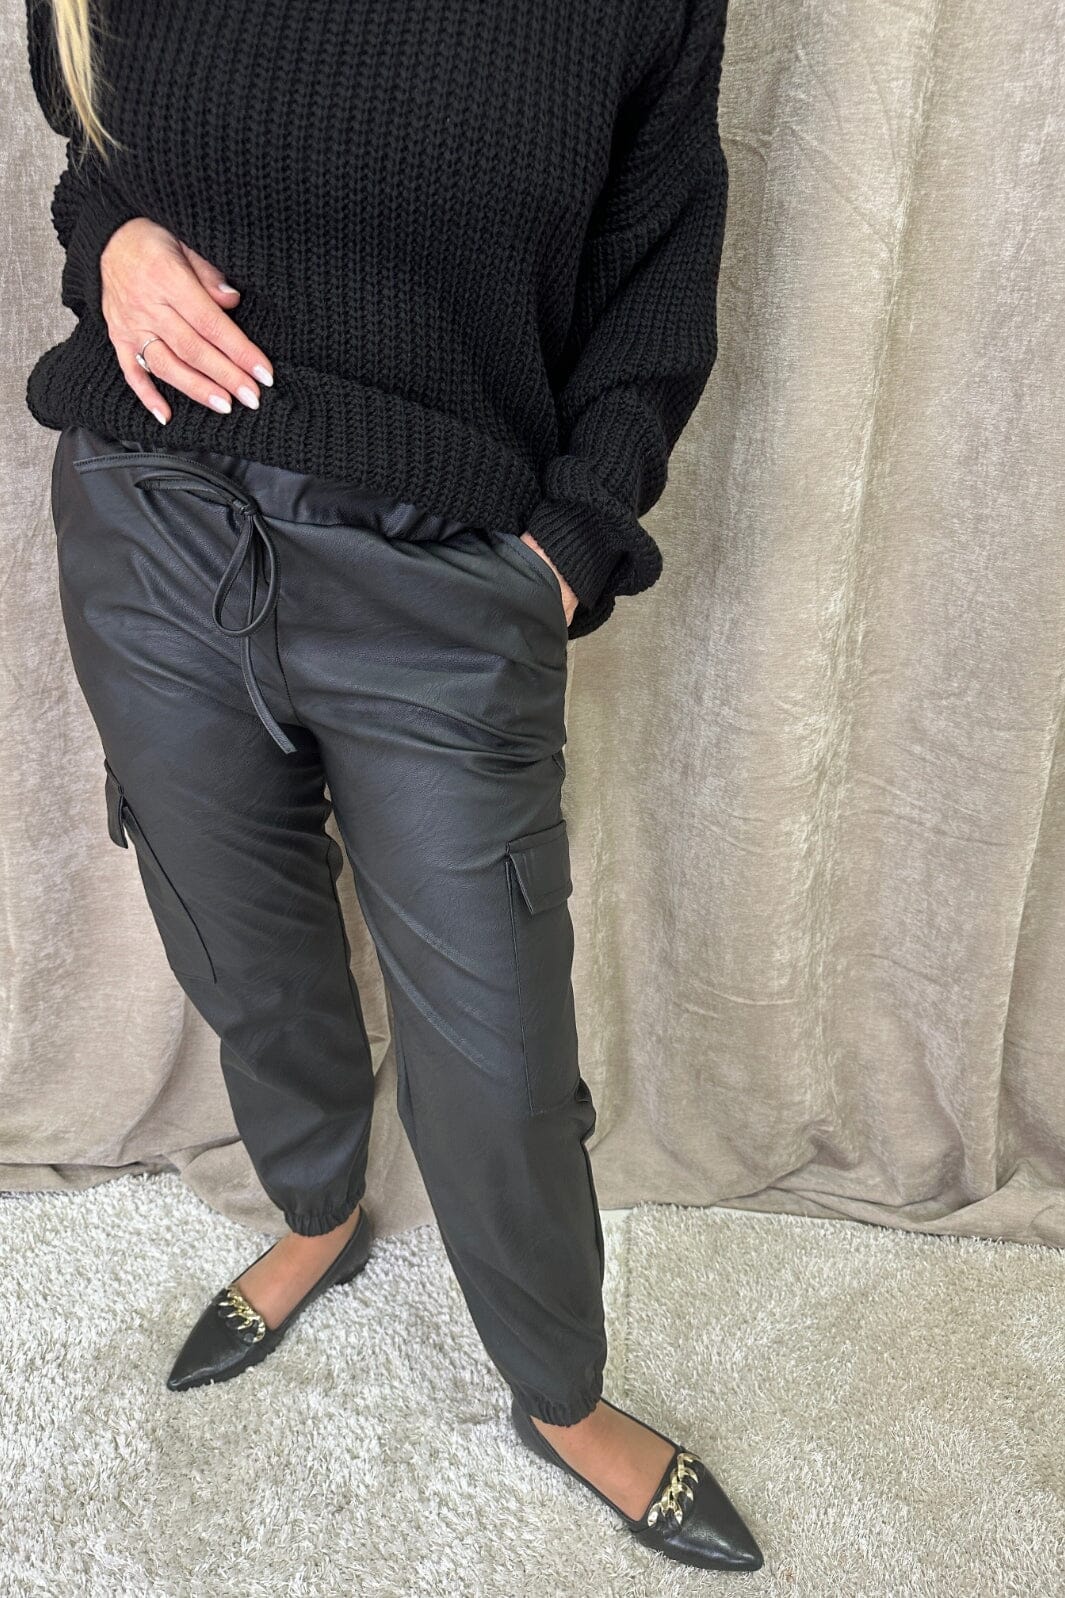 A-bee - Fake Leather Cargo Pants 5300A - Black Bukser 